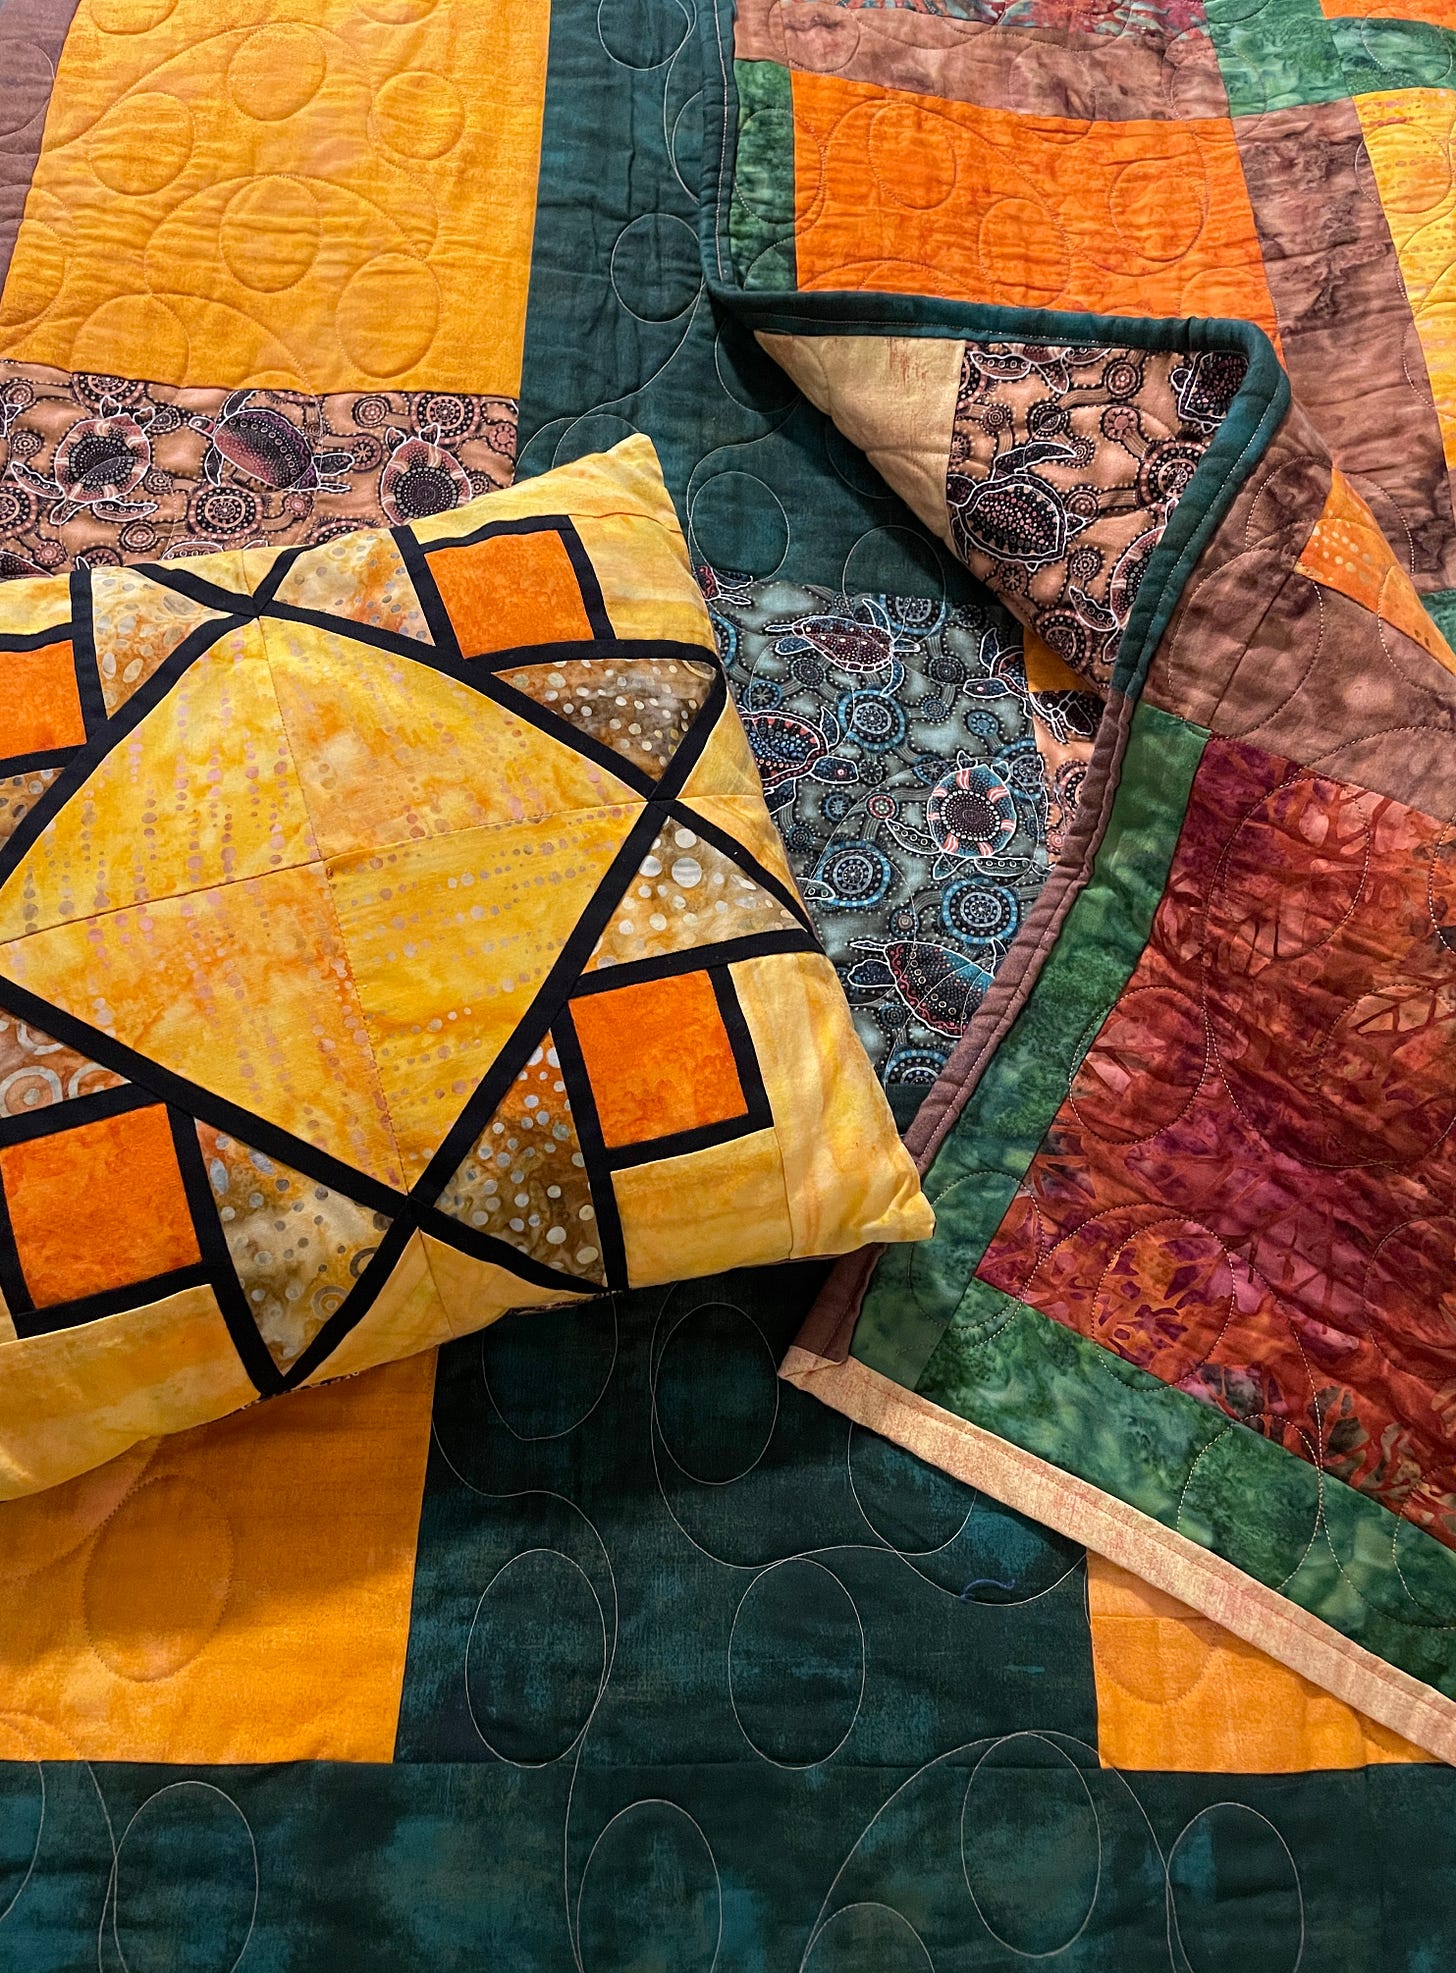 A quilt and pillow in yellows, oranges, and brown squares